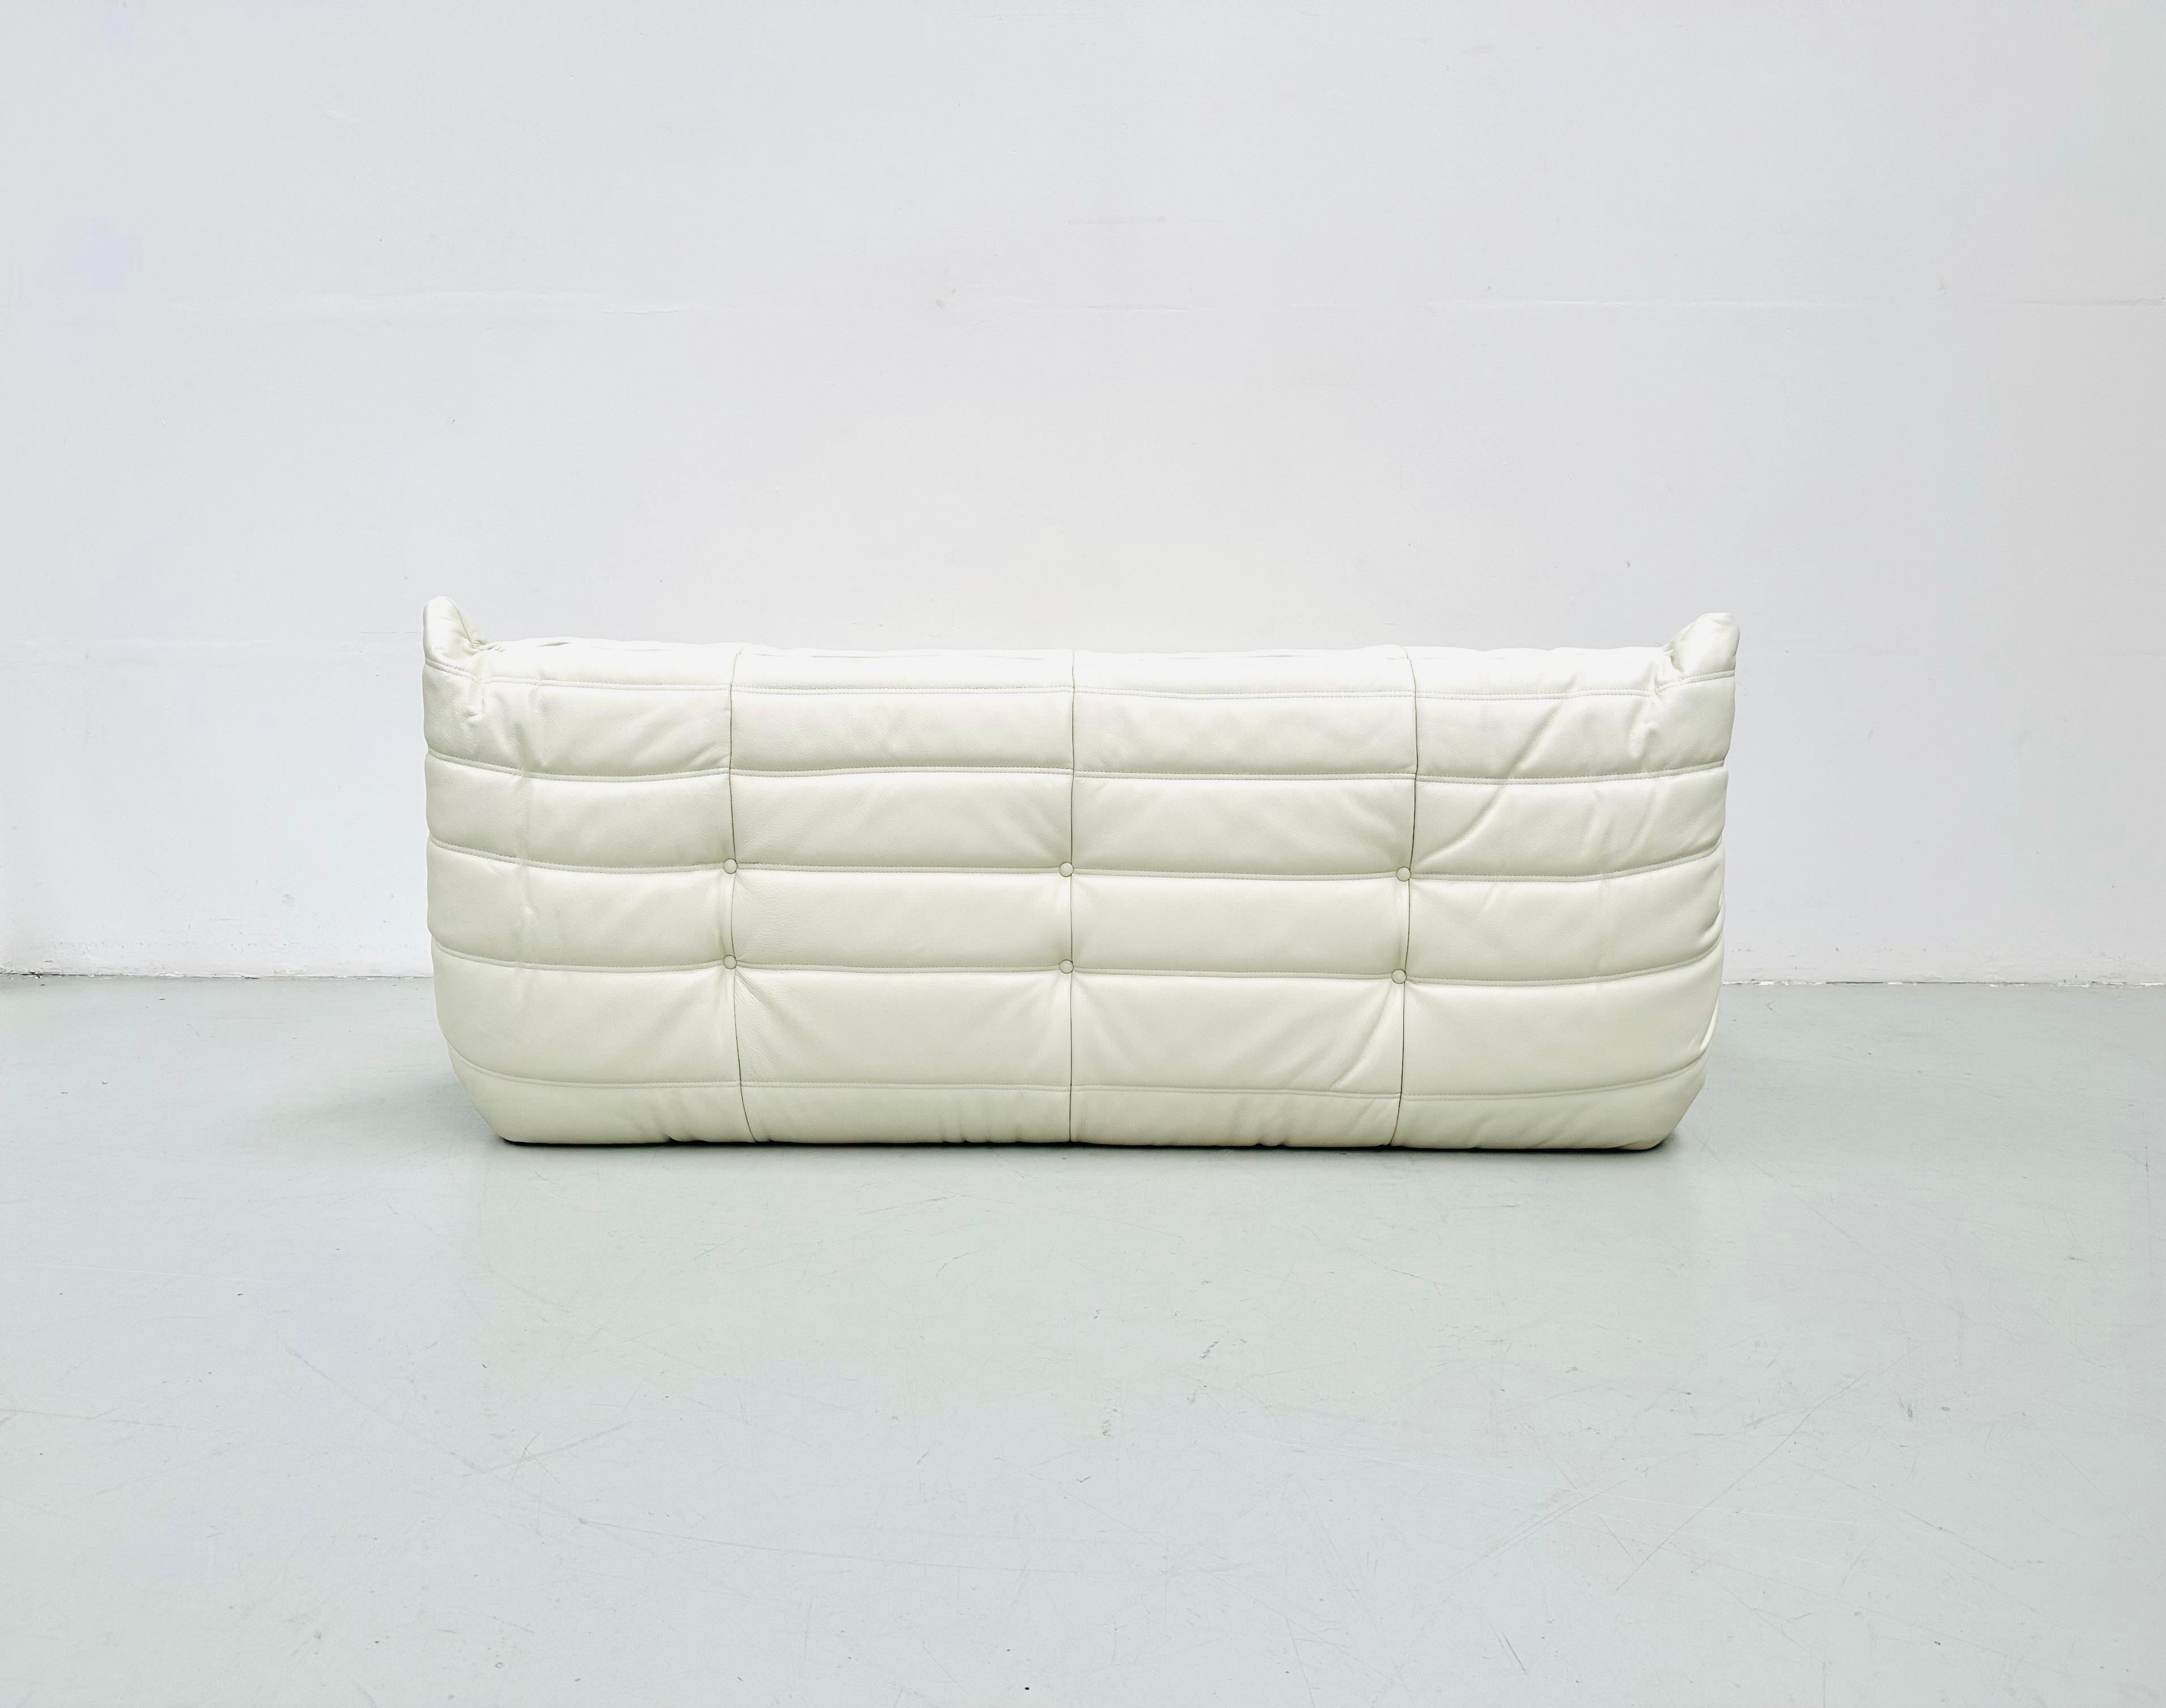 French Vintage Togo Sofa in White Leather by Michel Ducaroy for Ligne Roset. 4